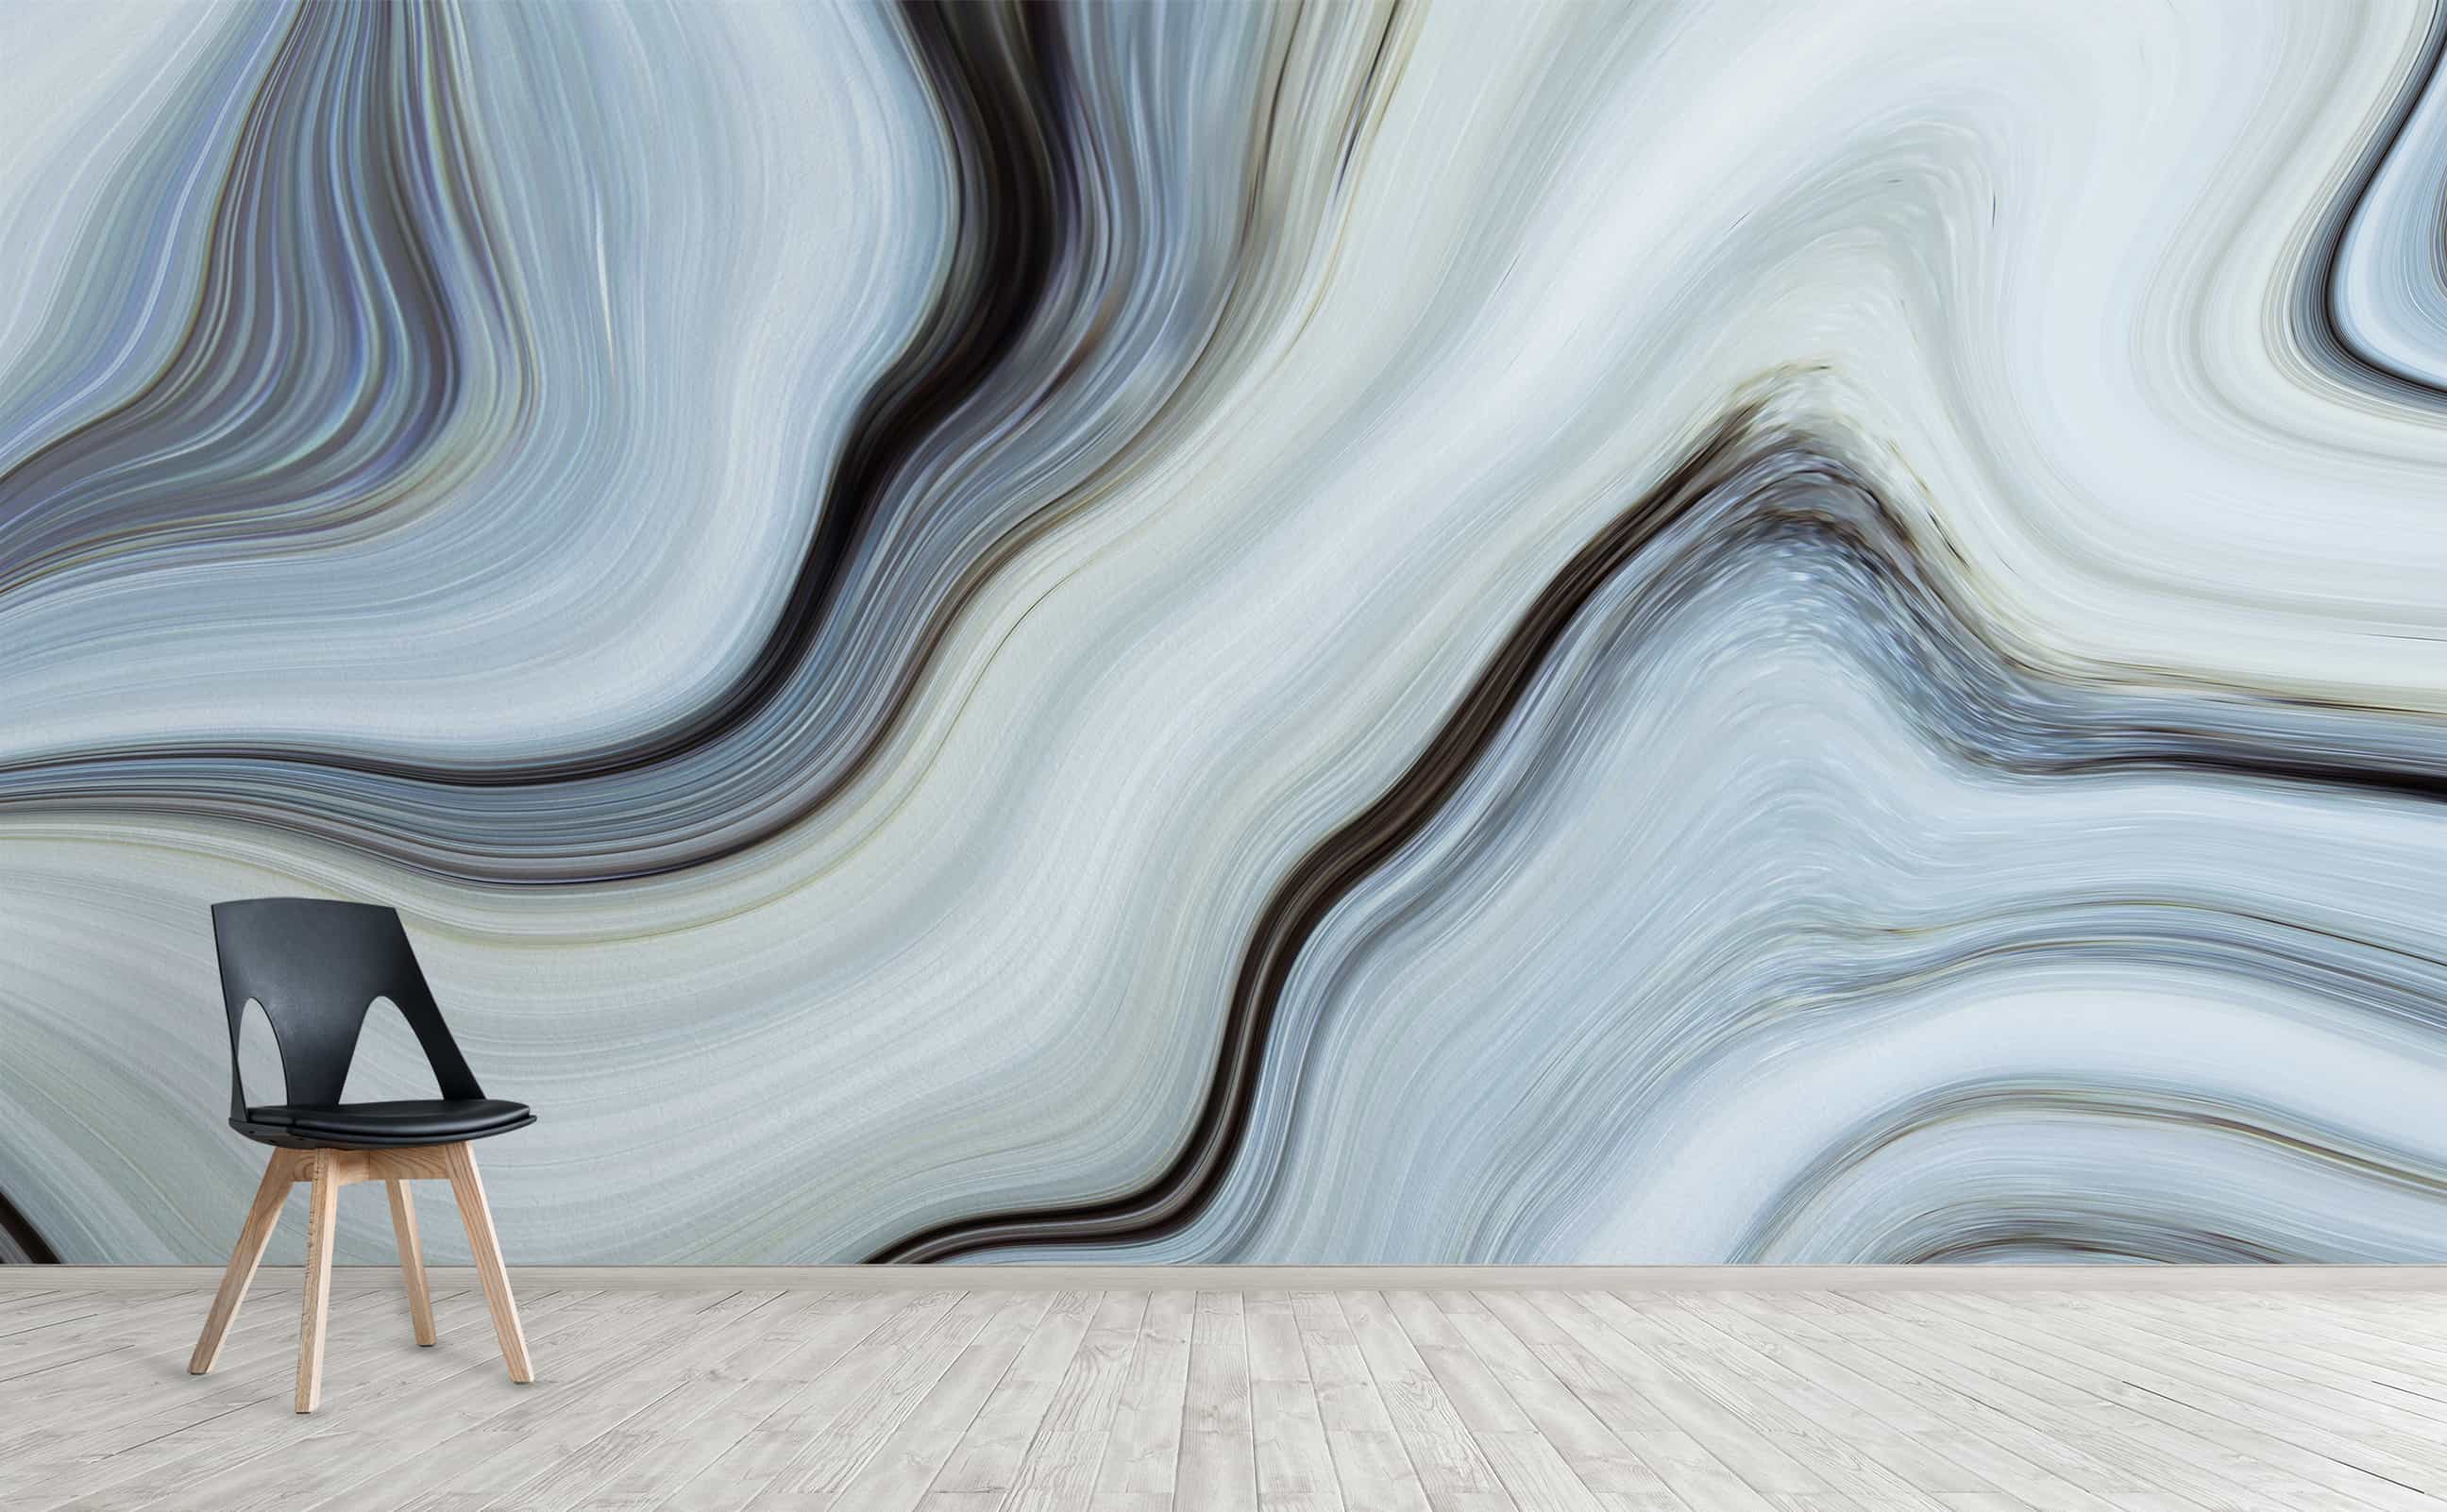 Buy Abstract Marble Generated Texture D3 NonPVC SelfAdhesive Peel  Stick  Vinyl Wallpaper Roll Online in India at Best Price  Modern WallPaper   Wall Arts  Home Decor  Furniture 